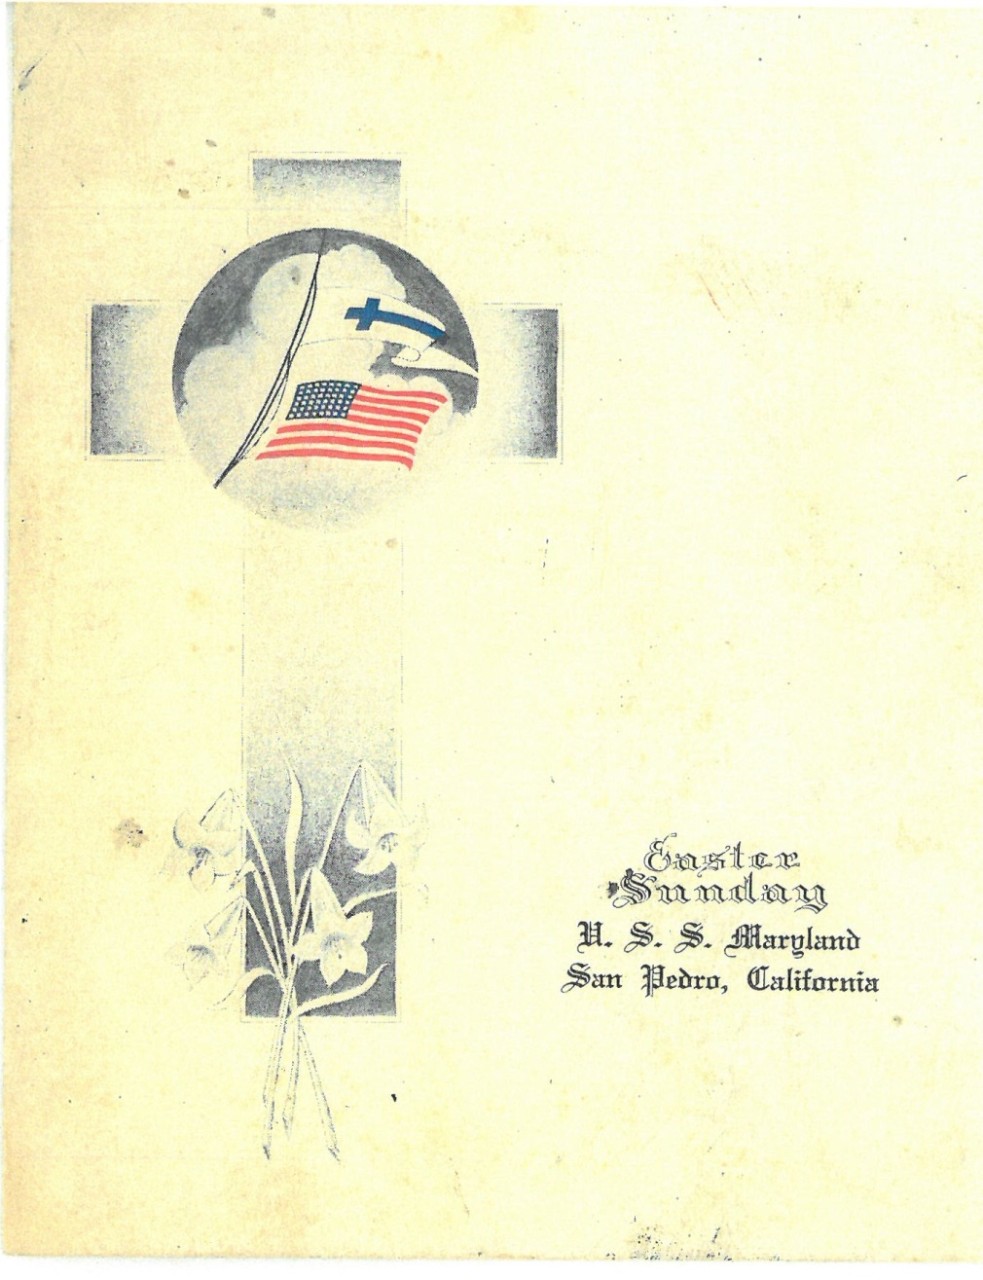 Picture of a cross with an American flag and Easter lilies with words: Easter Sunday, USS Maryland, San Pedro, Calfornia.